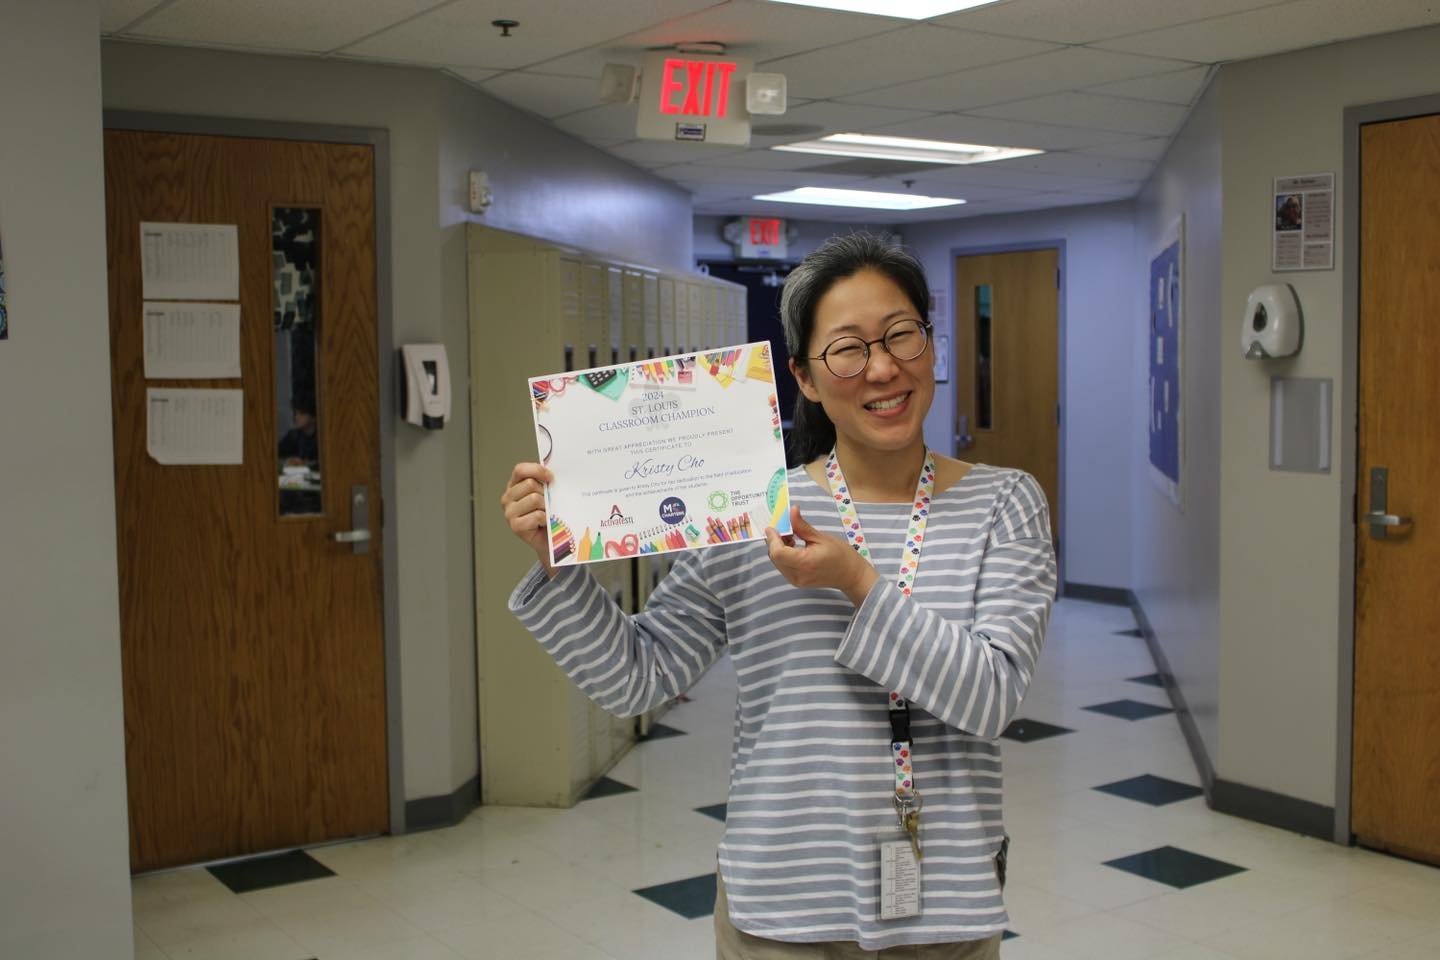 Ms. Cho received the Classroom Champion Award today presented by the Communications Program Manager with the Opportunity Trust.

She is so hardworking, always comes to work with a smile on her face, and shows up for her students each and every day. S